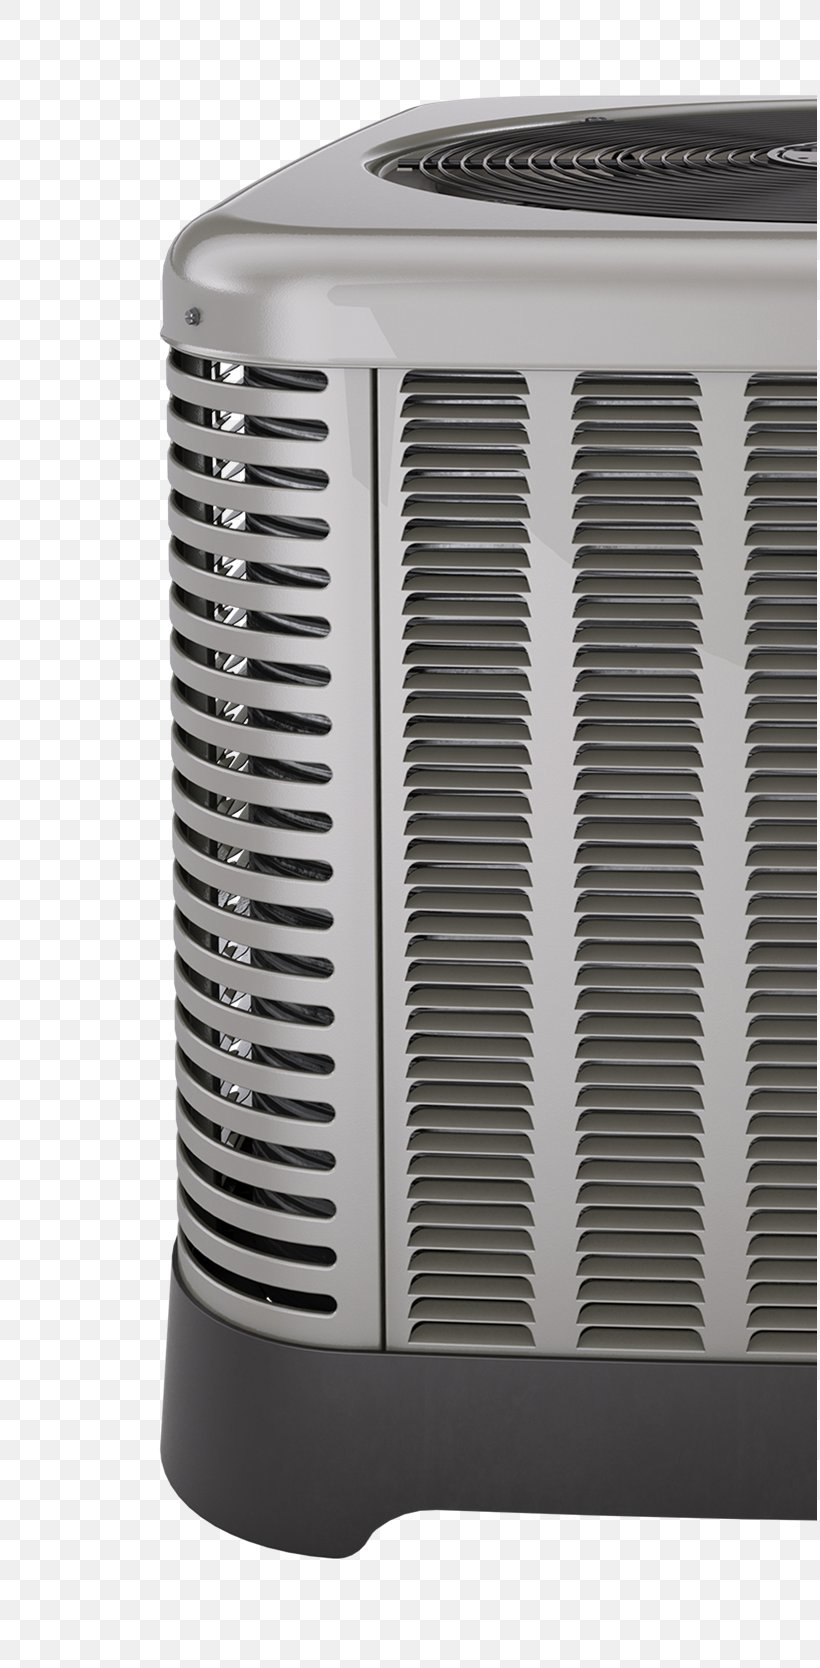 Furnace Seasonal Energy Efficiency Ratio Rheem Heat Pump Condenser, PNG, 815x1668px, Furnace, Air Conditioning, Coil, Condenser, Heat Download Free